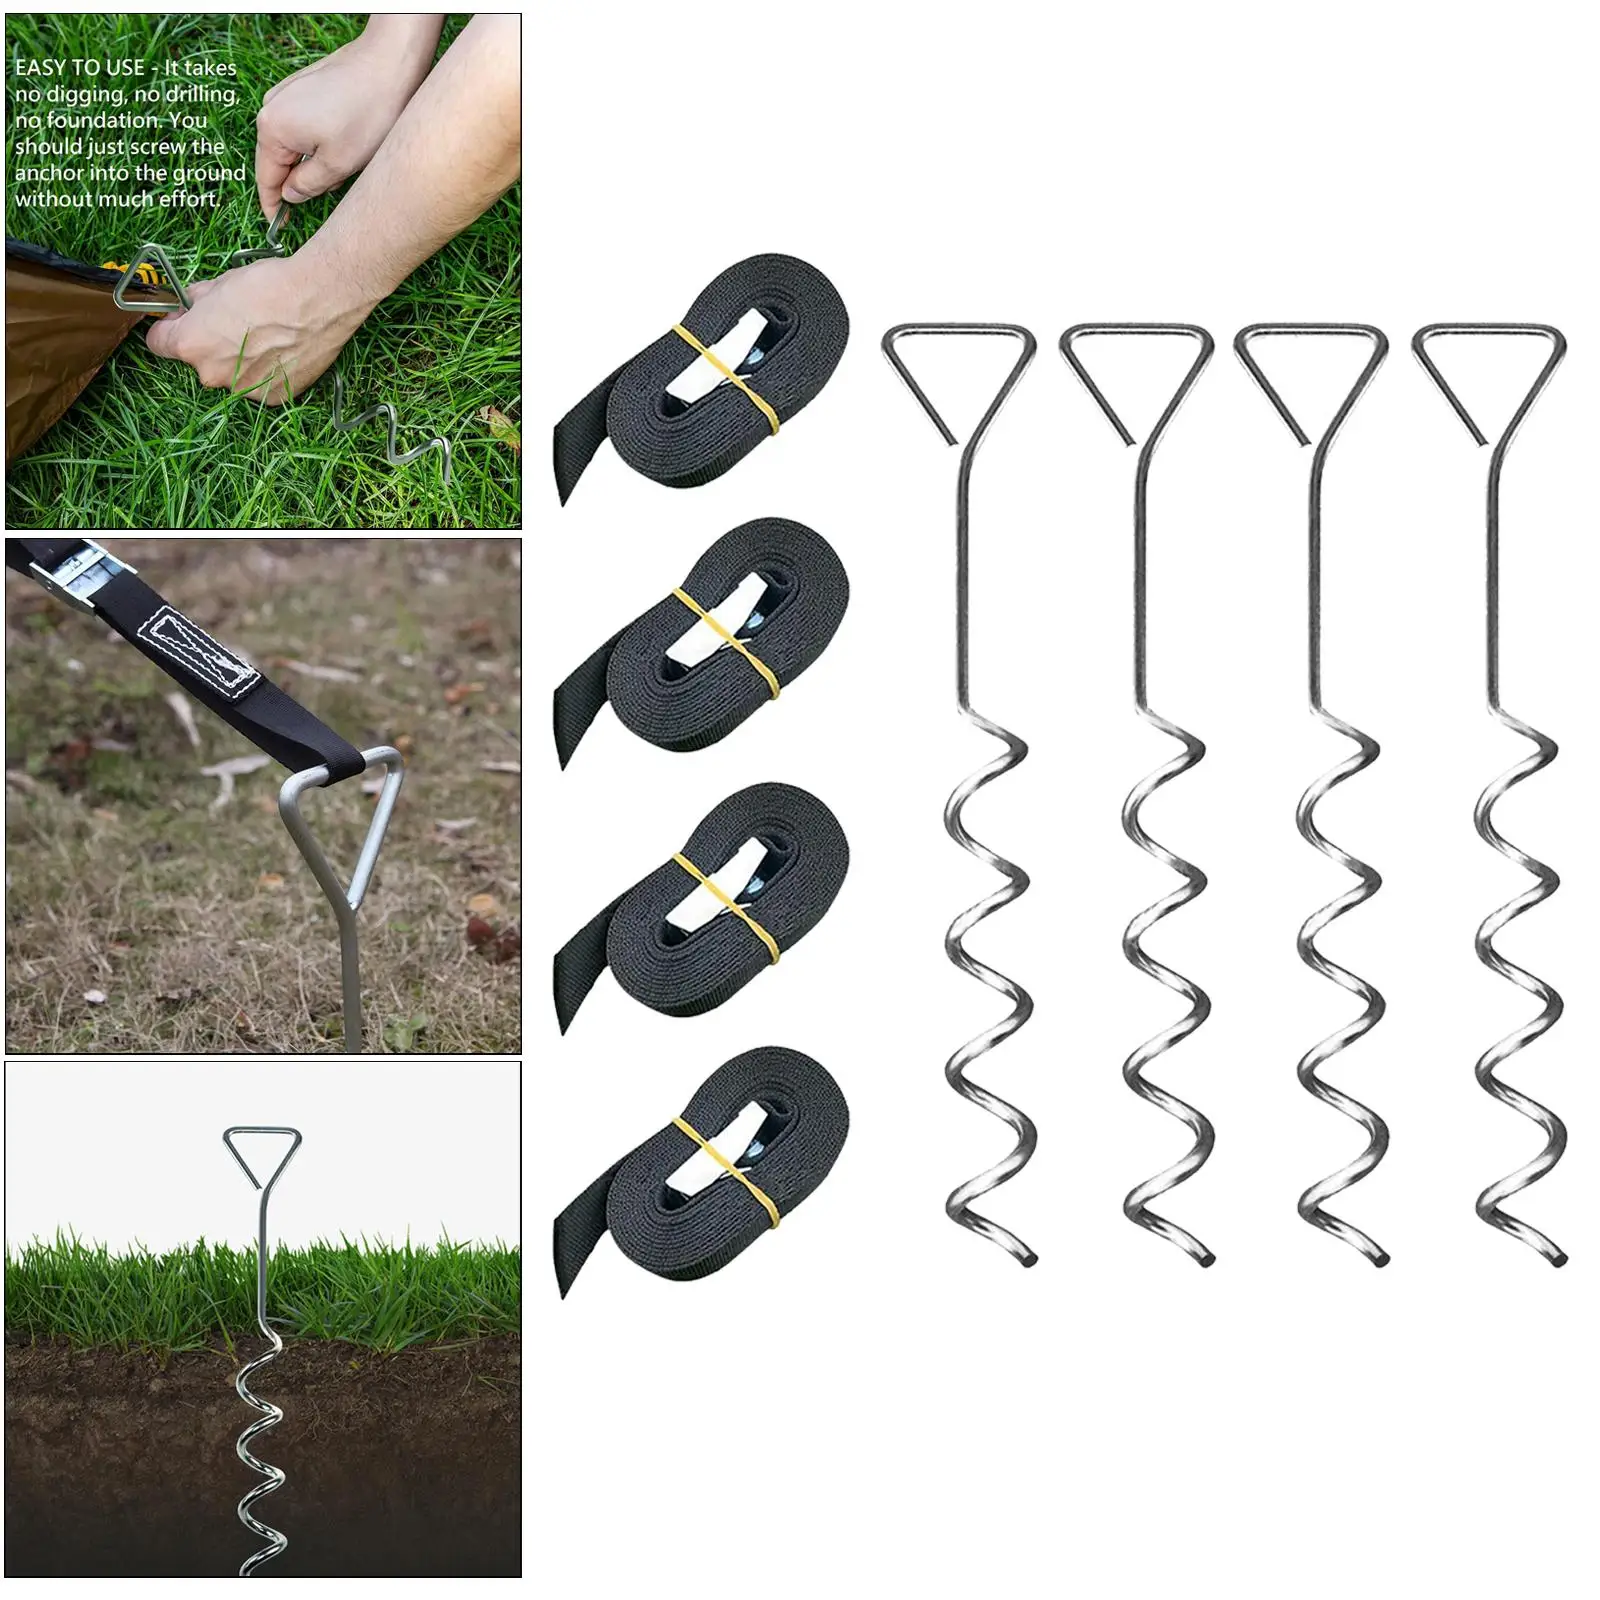 Heavy Duty Outdoor Tent Camping Ground Anchor Canopies Outdoor Camping